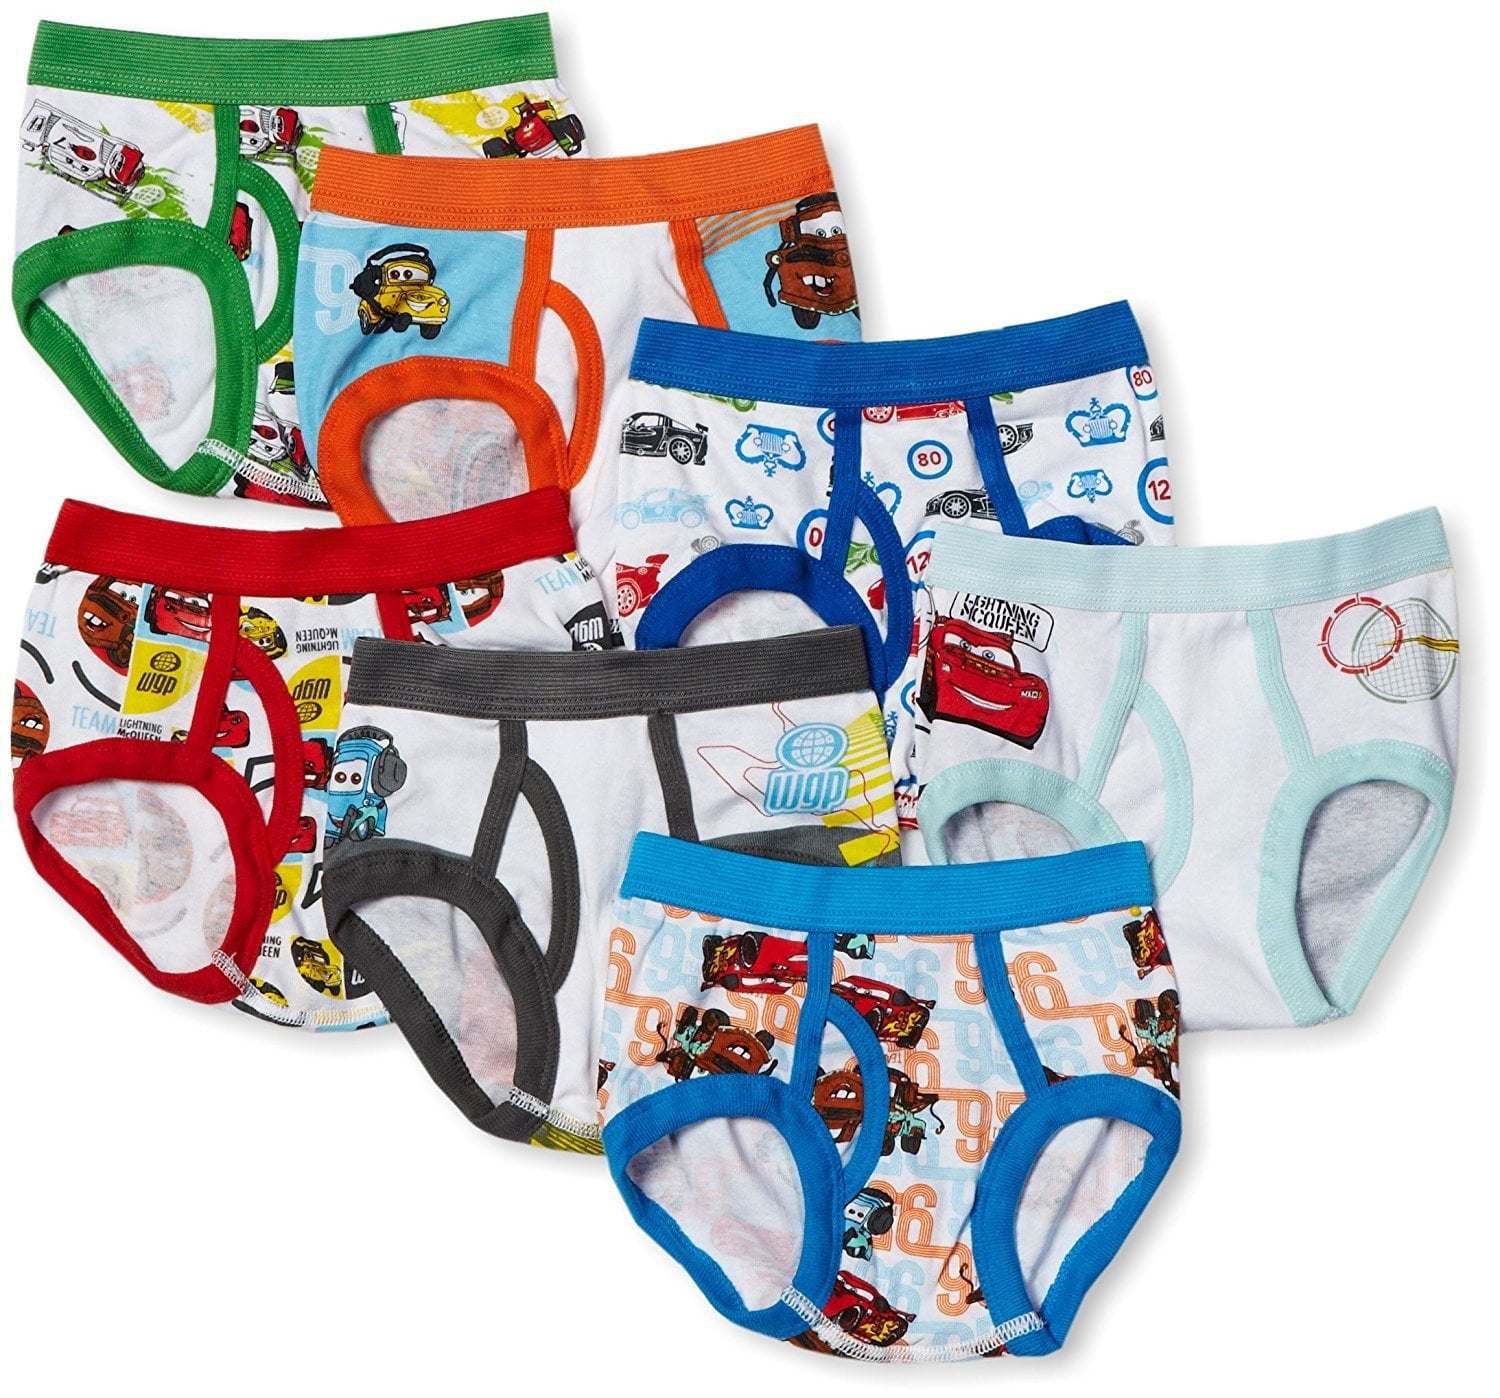 Boys Cars Paw Patrol Mickey Mouse and More Underwear. Sizes 2T-8